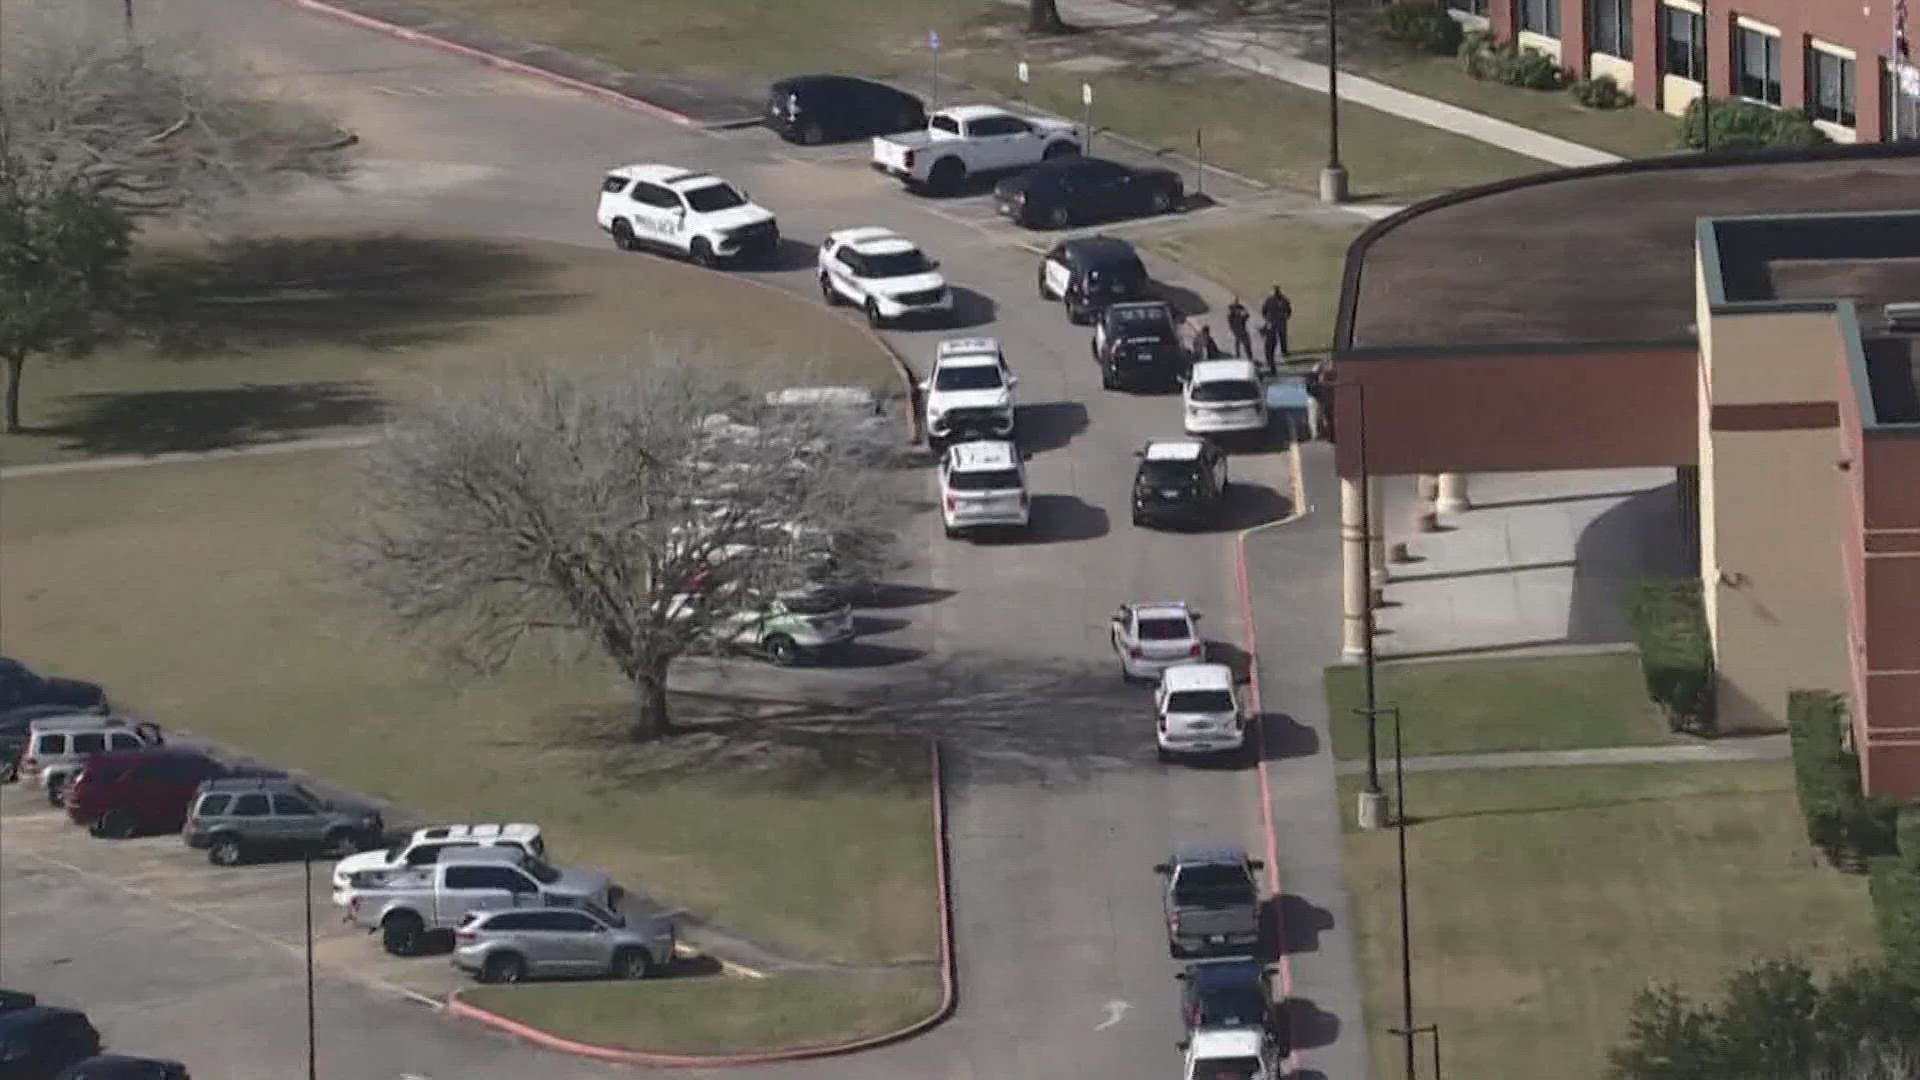 A bomb threat forced students and teachers to evacuate Santa Fe High School Friday. Police searched the school and found nothing.